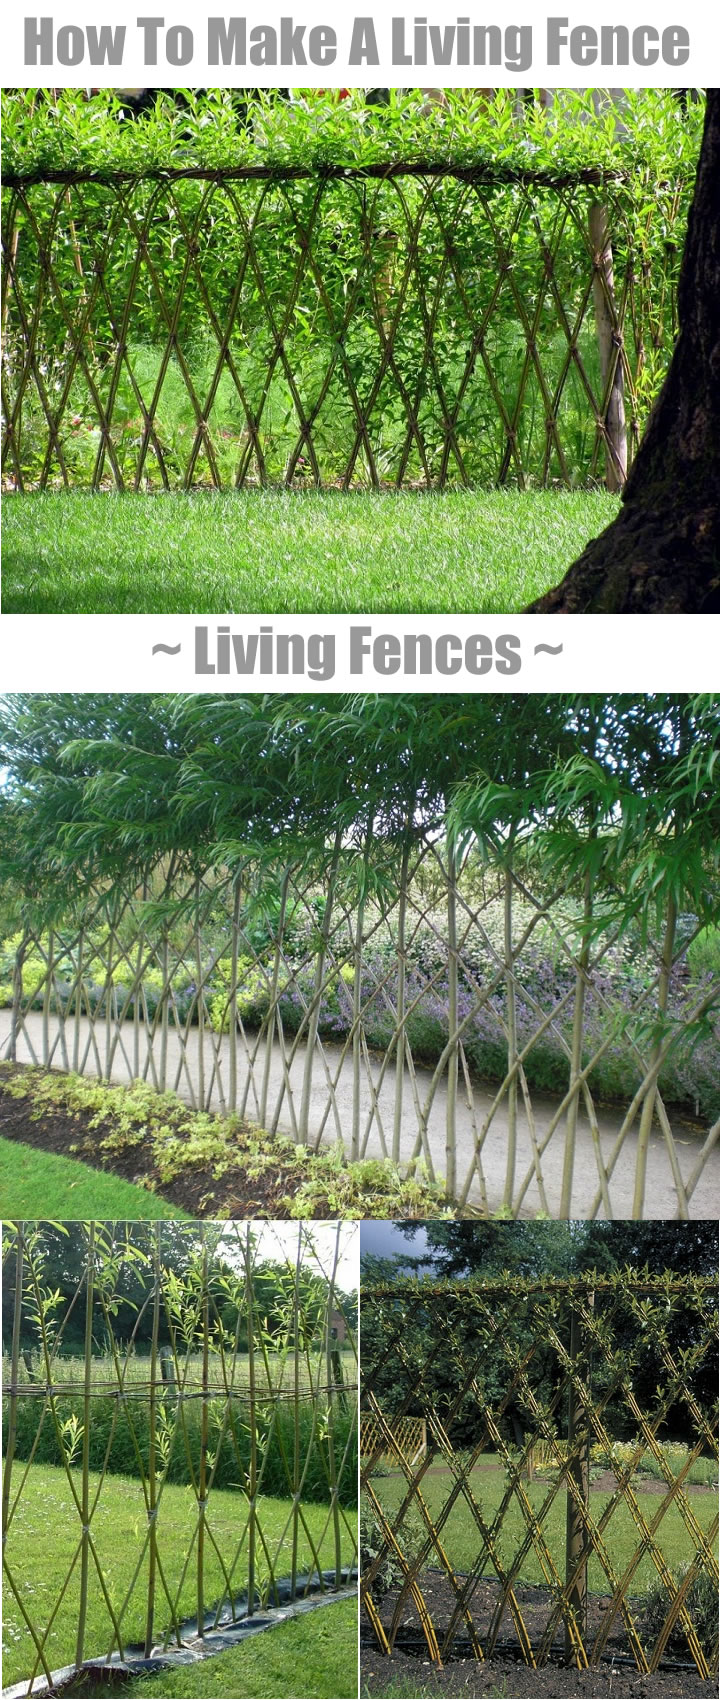 Living Fences – How To Make A Living Fence For Your Garden...